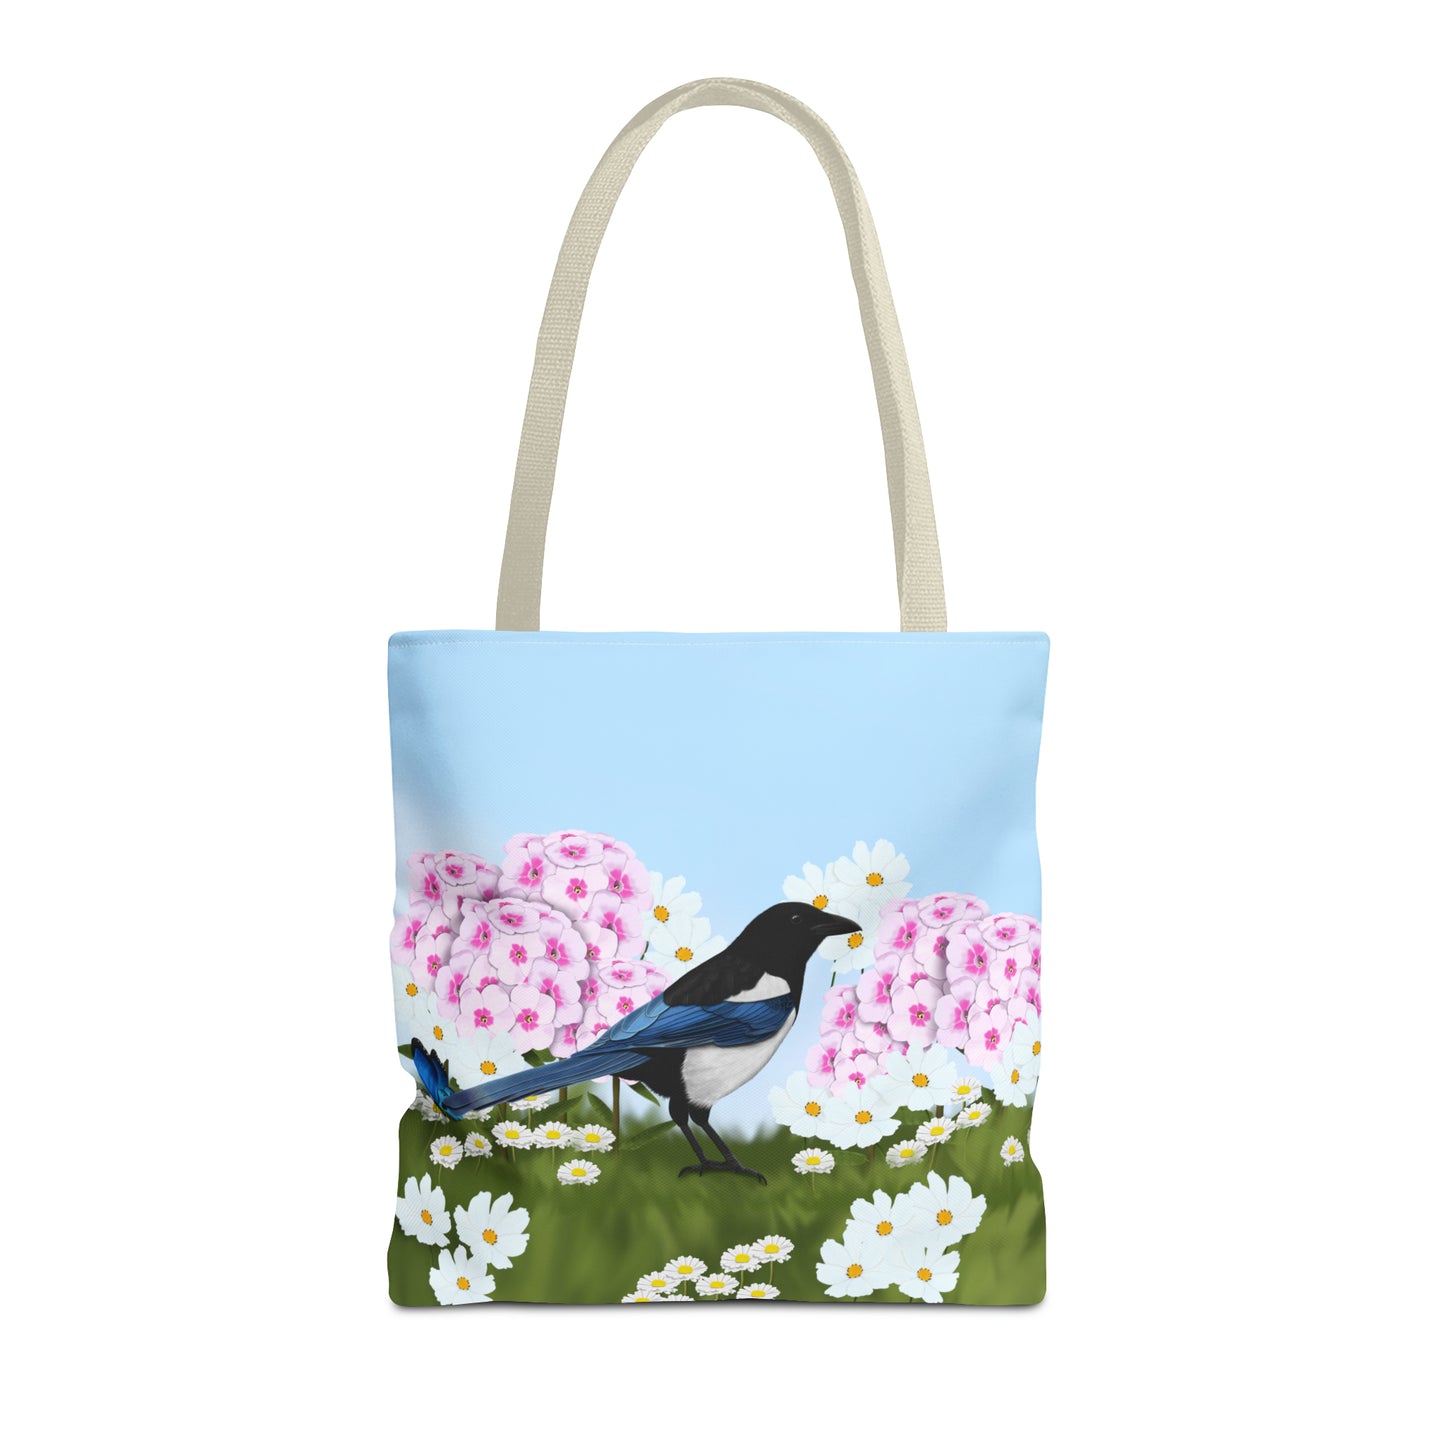 Magpie in Summer Flowers Bird Tote Bag 16"x16"